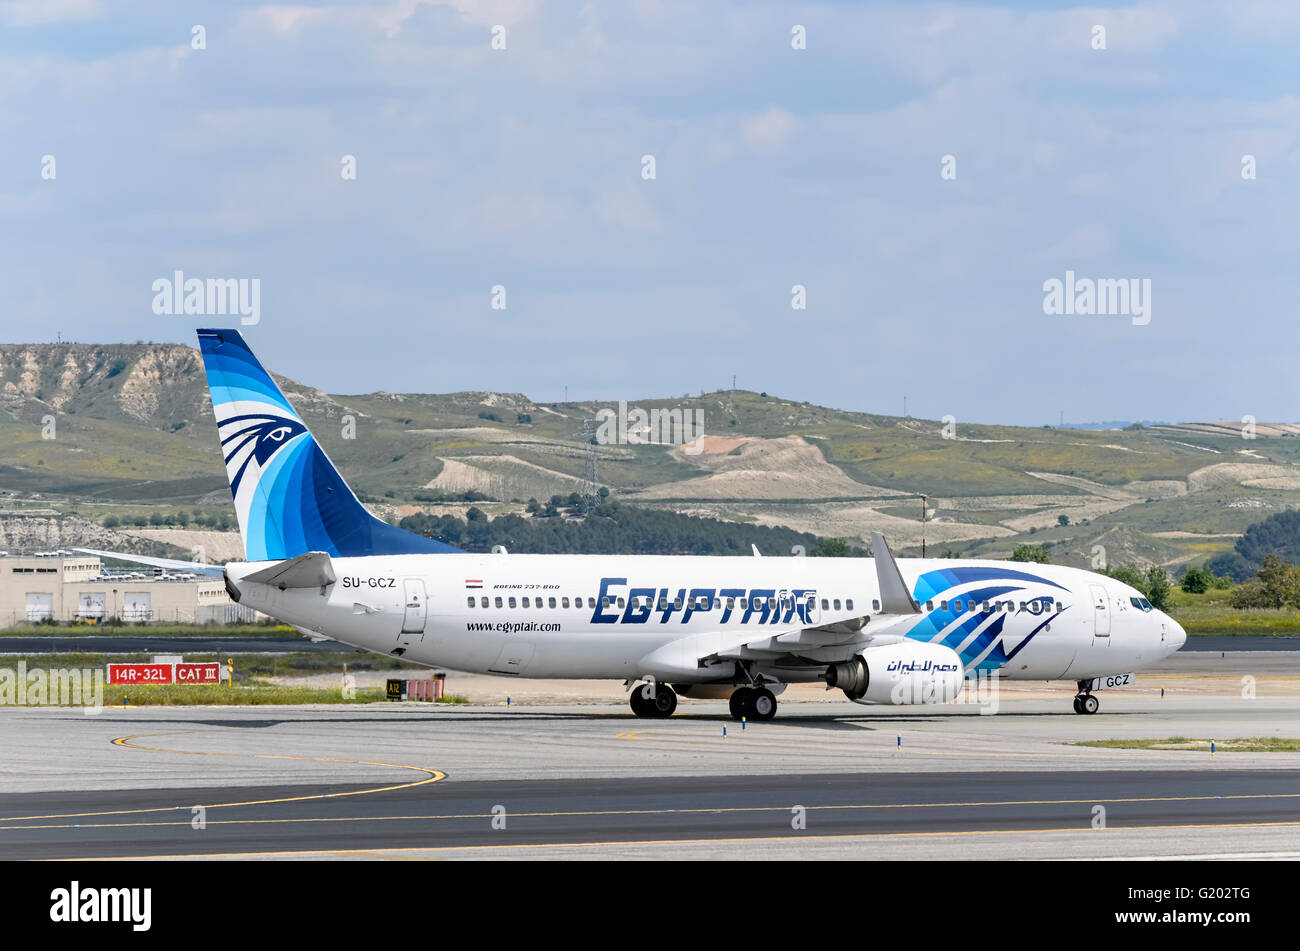 Aircraft -Boeing 737- of -Egyptair- airline, direction to airport terminal of Madrid-Barajas airport. Stock Photo